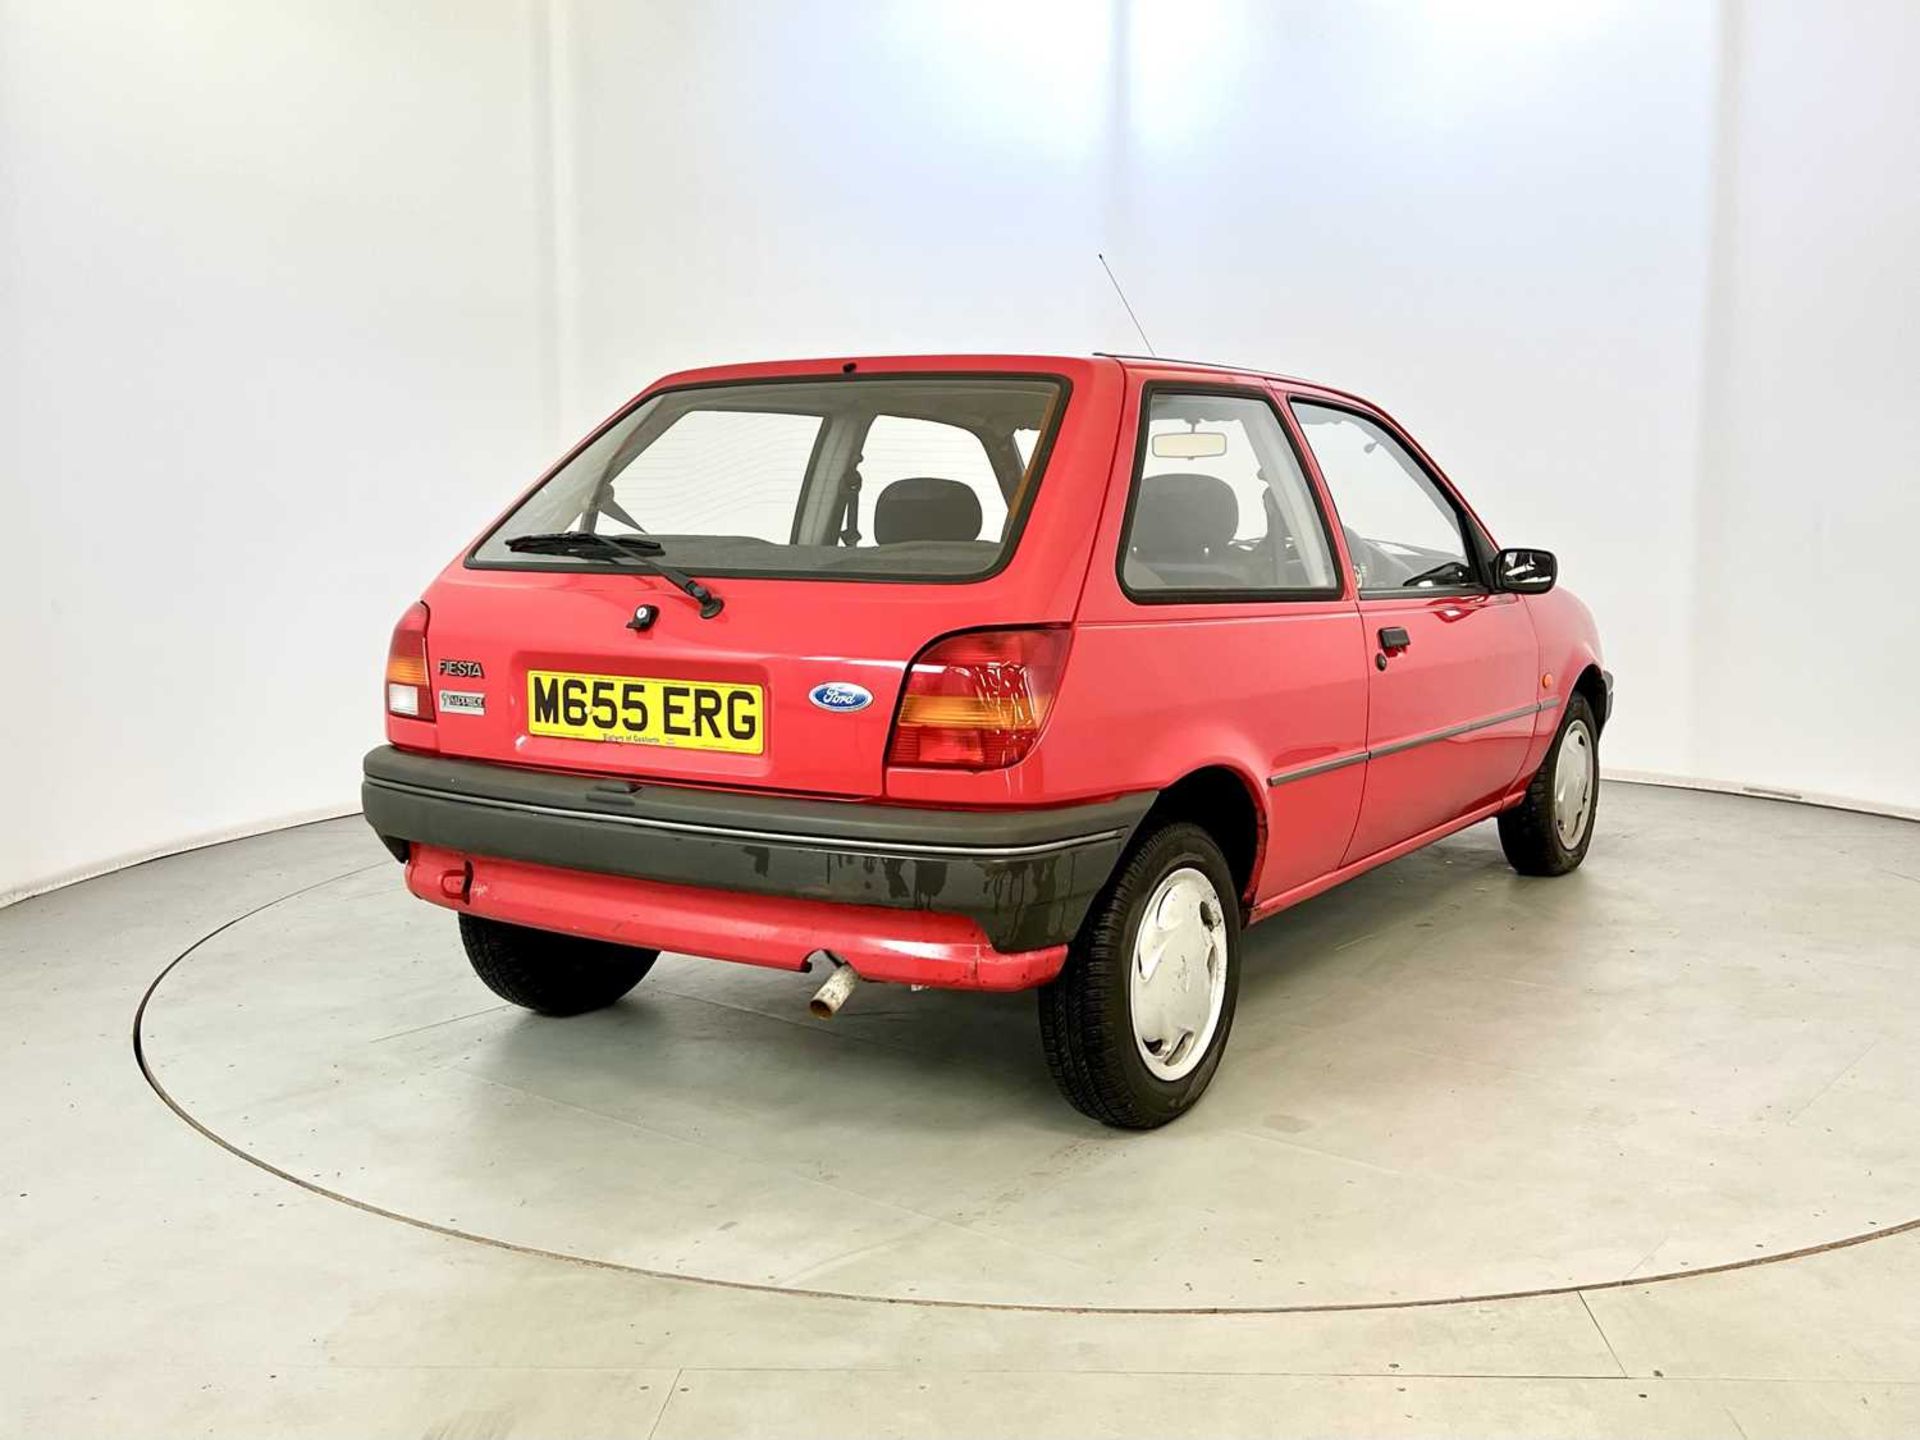 1994 Ford Fiesta Sapphire - Image 9 of 27